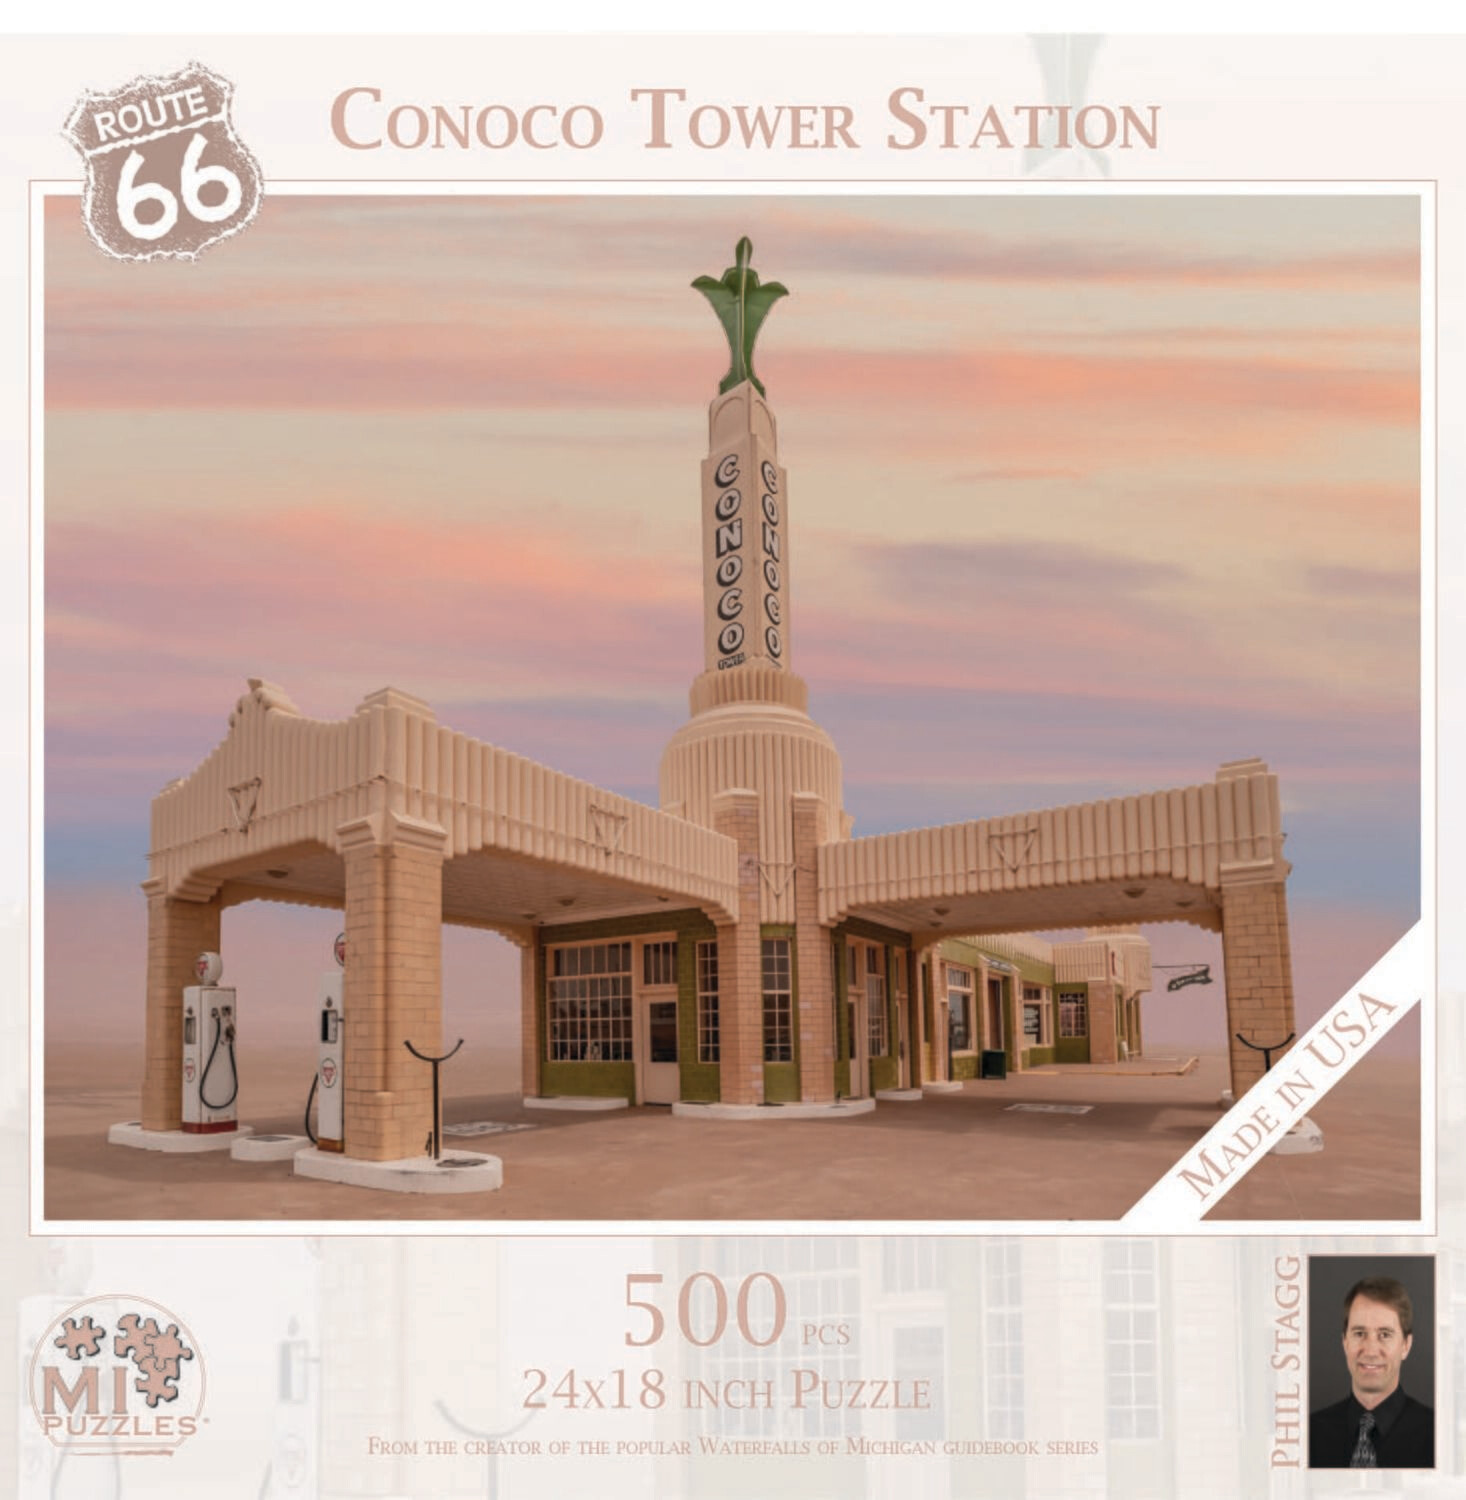 CONOCO TOWER STATION